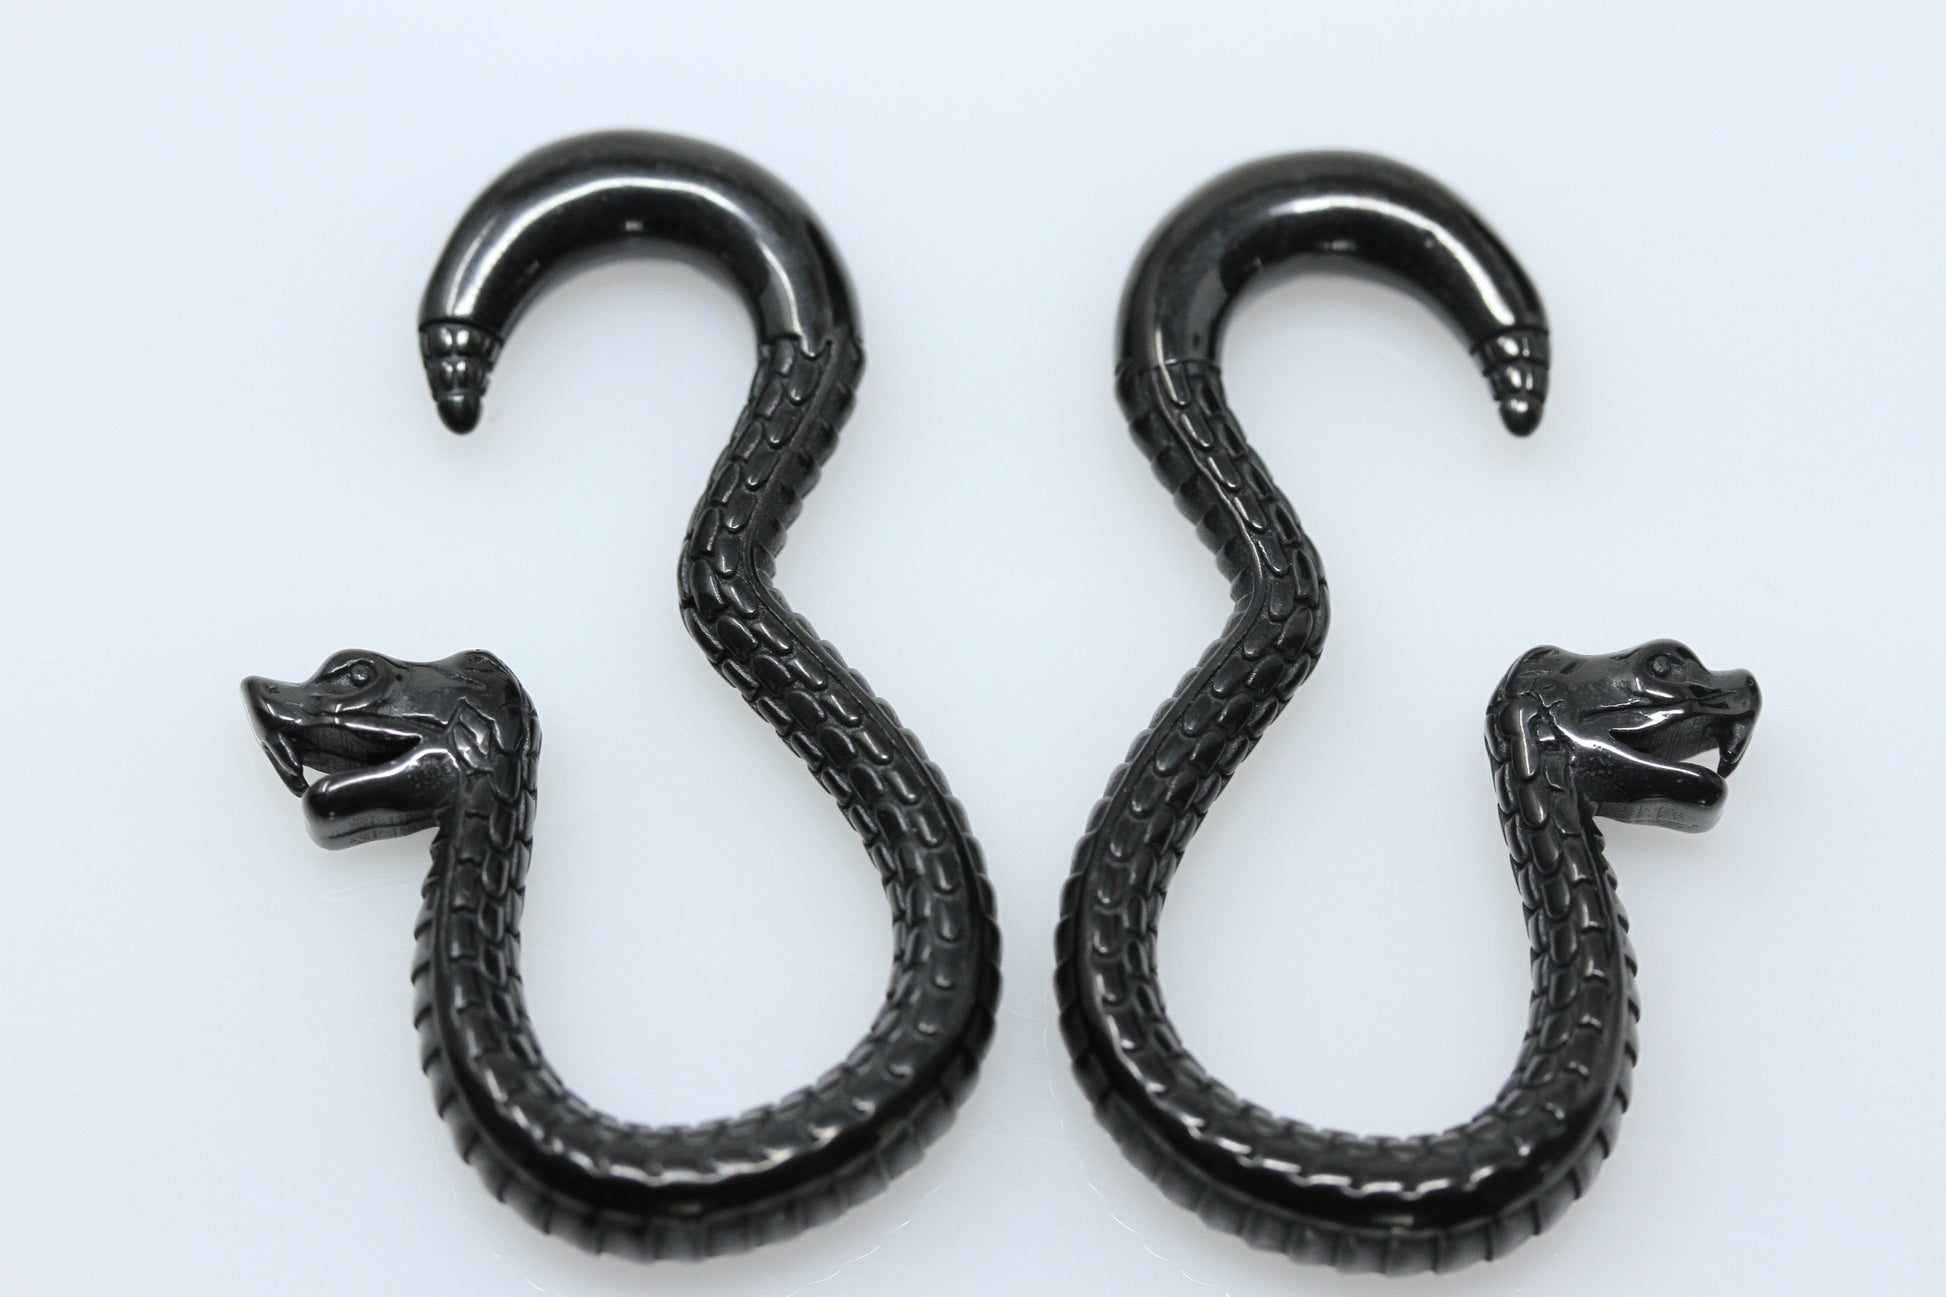 Stainless steel snake weights